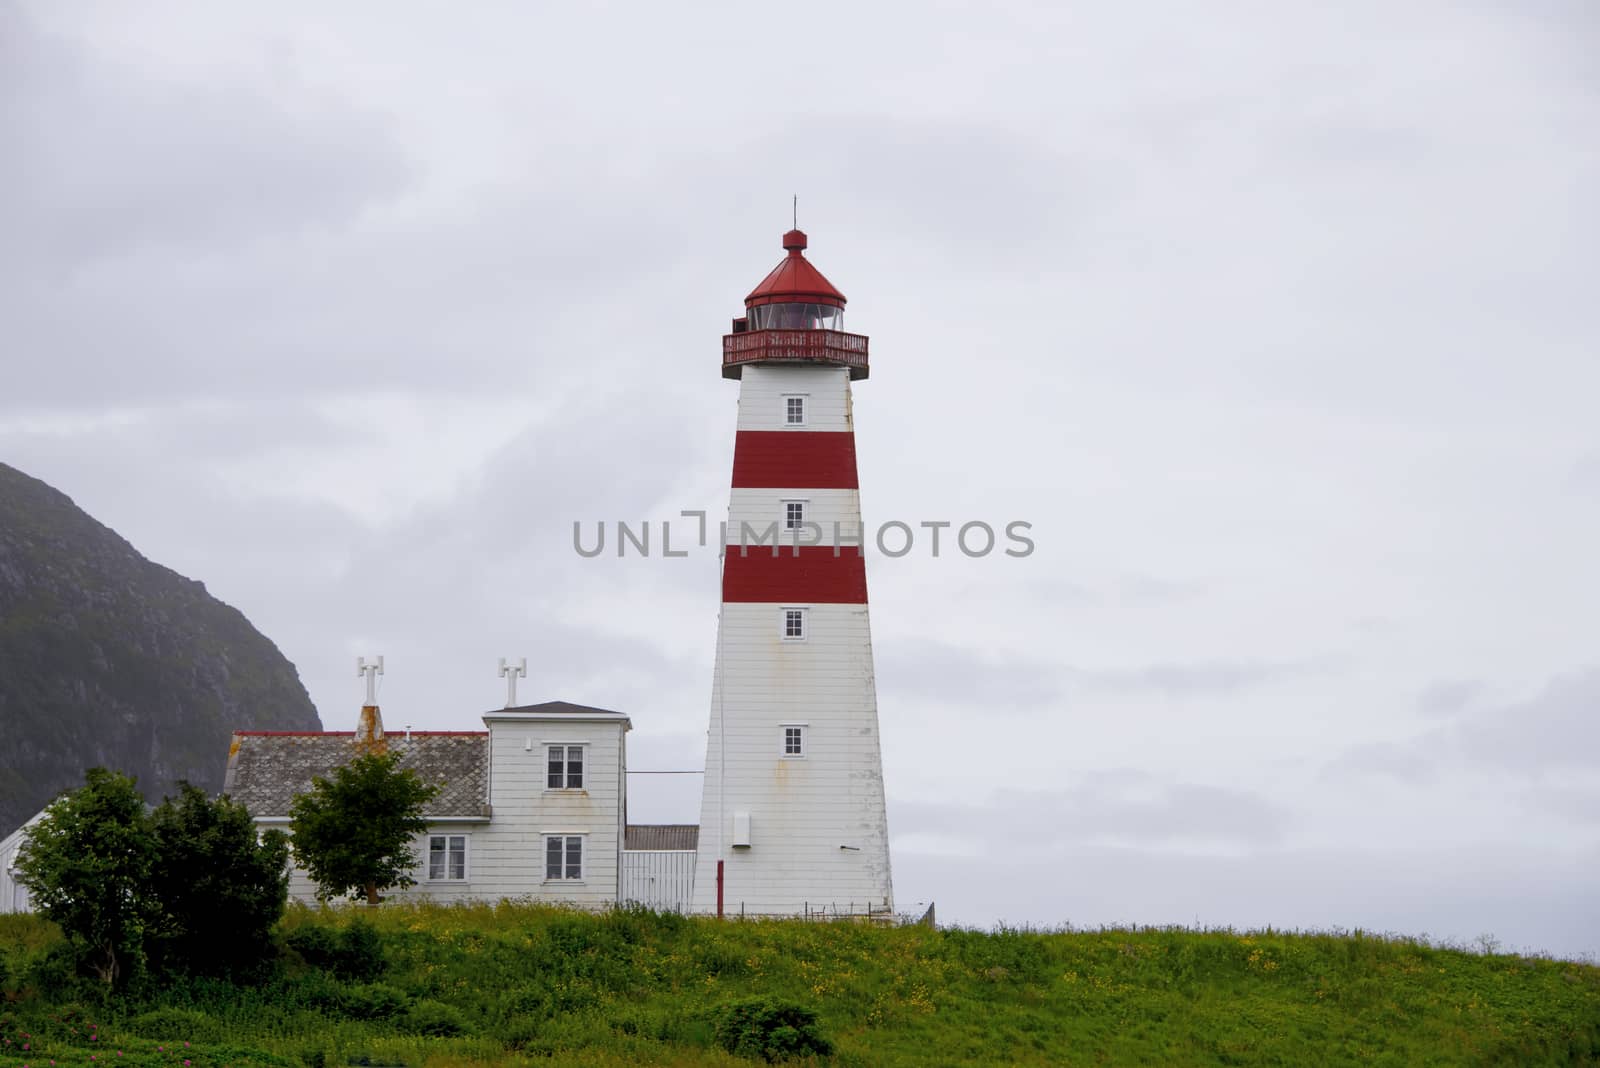 The lighthouse at Alnes, Norway